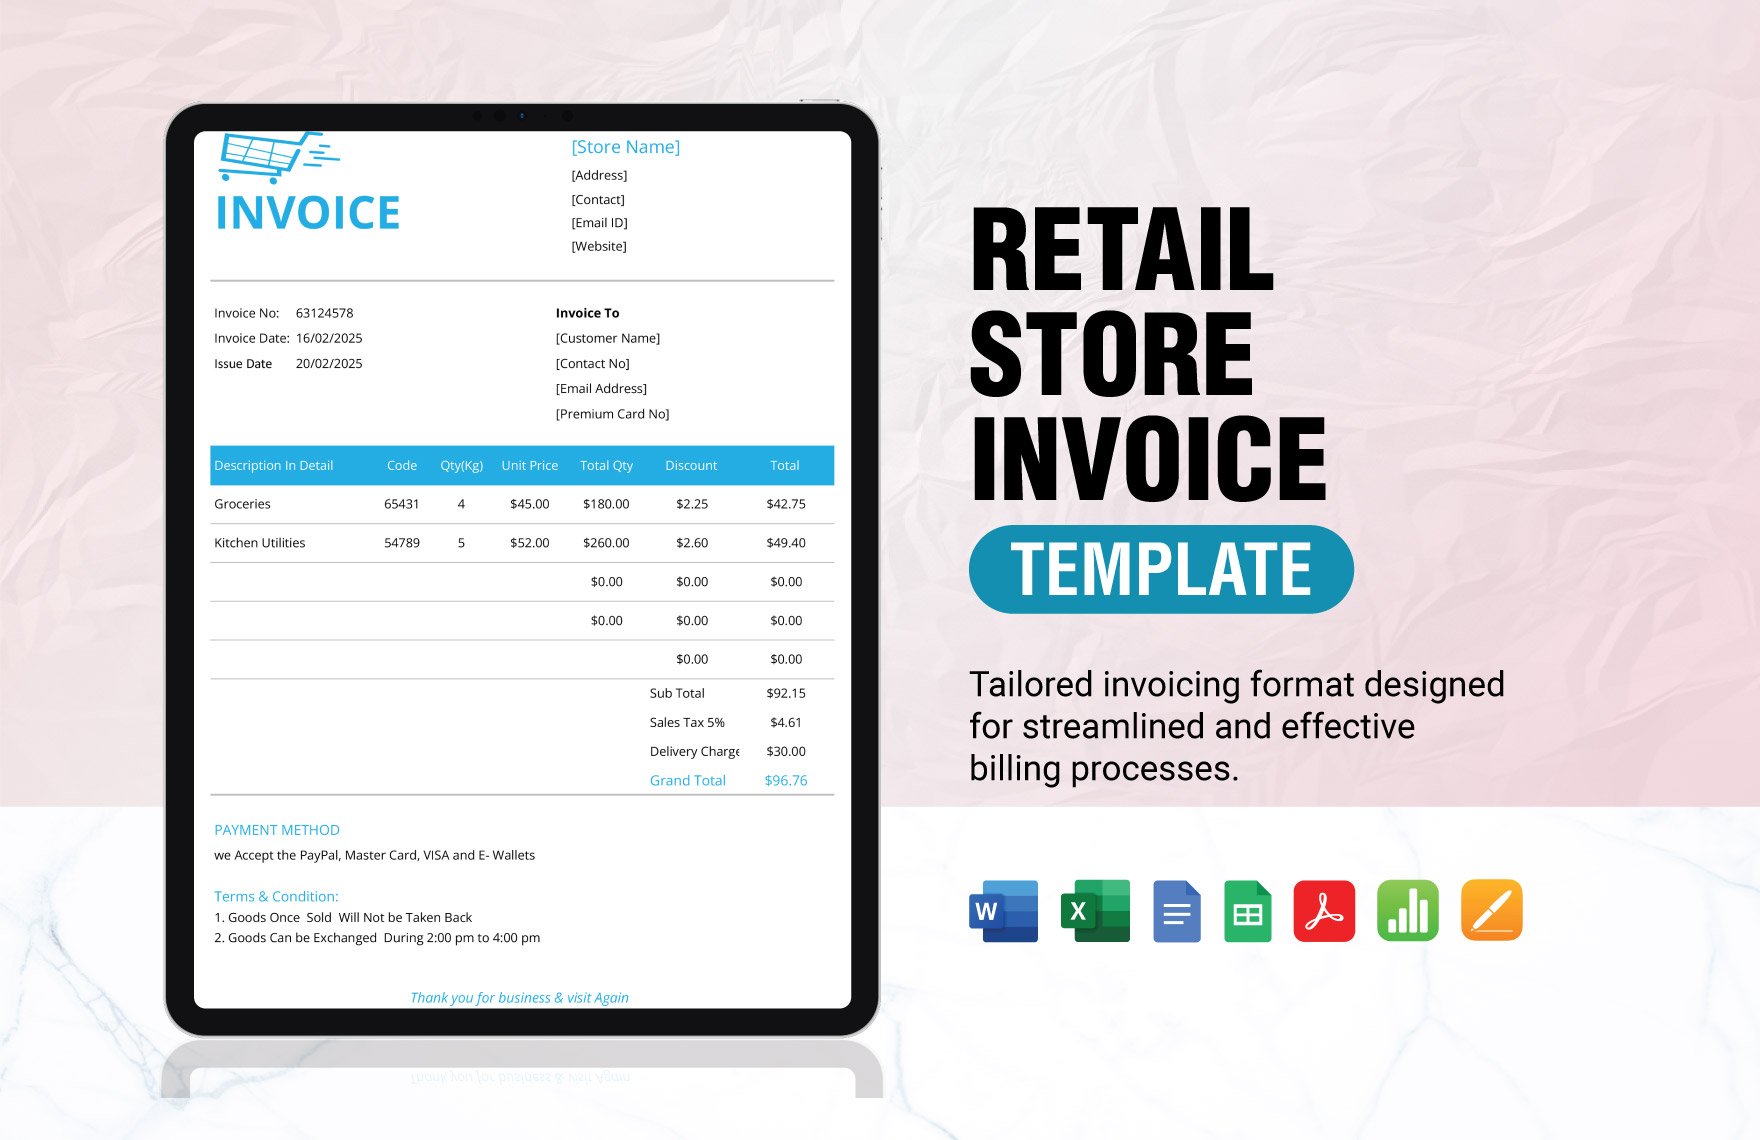 Free Retail Store Invoice Template in Word, Google Docs, Excel, PDF, Google Sheets, Apple Pages, Apple Numbers